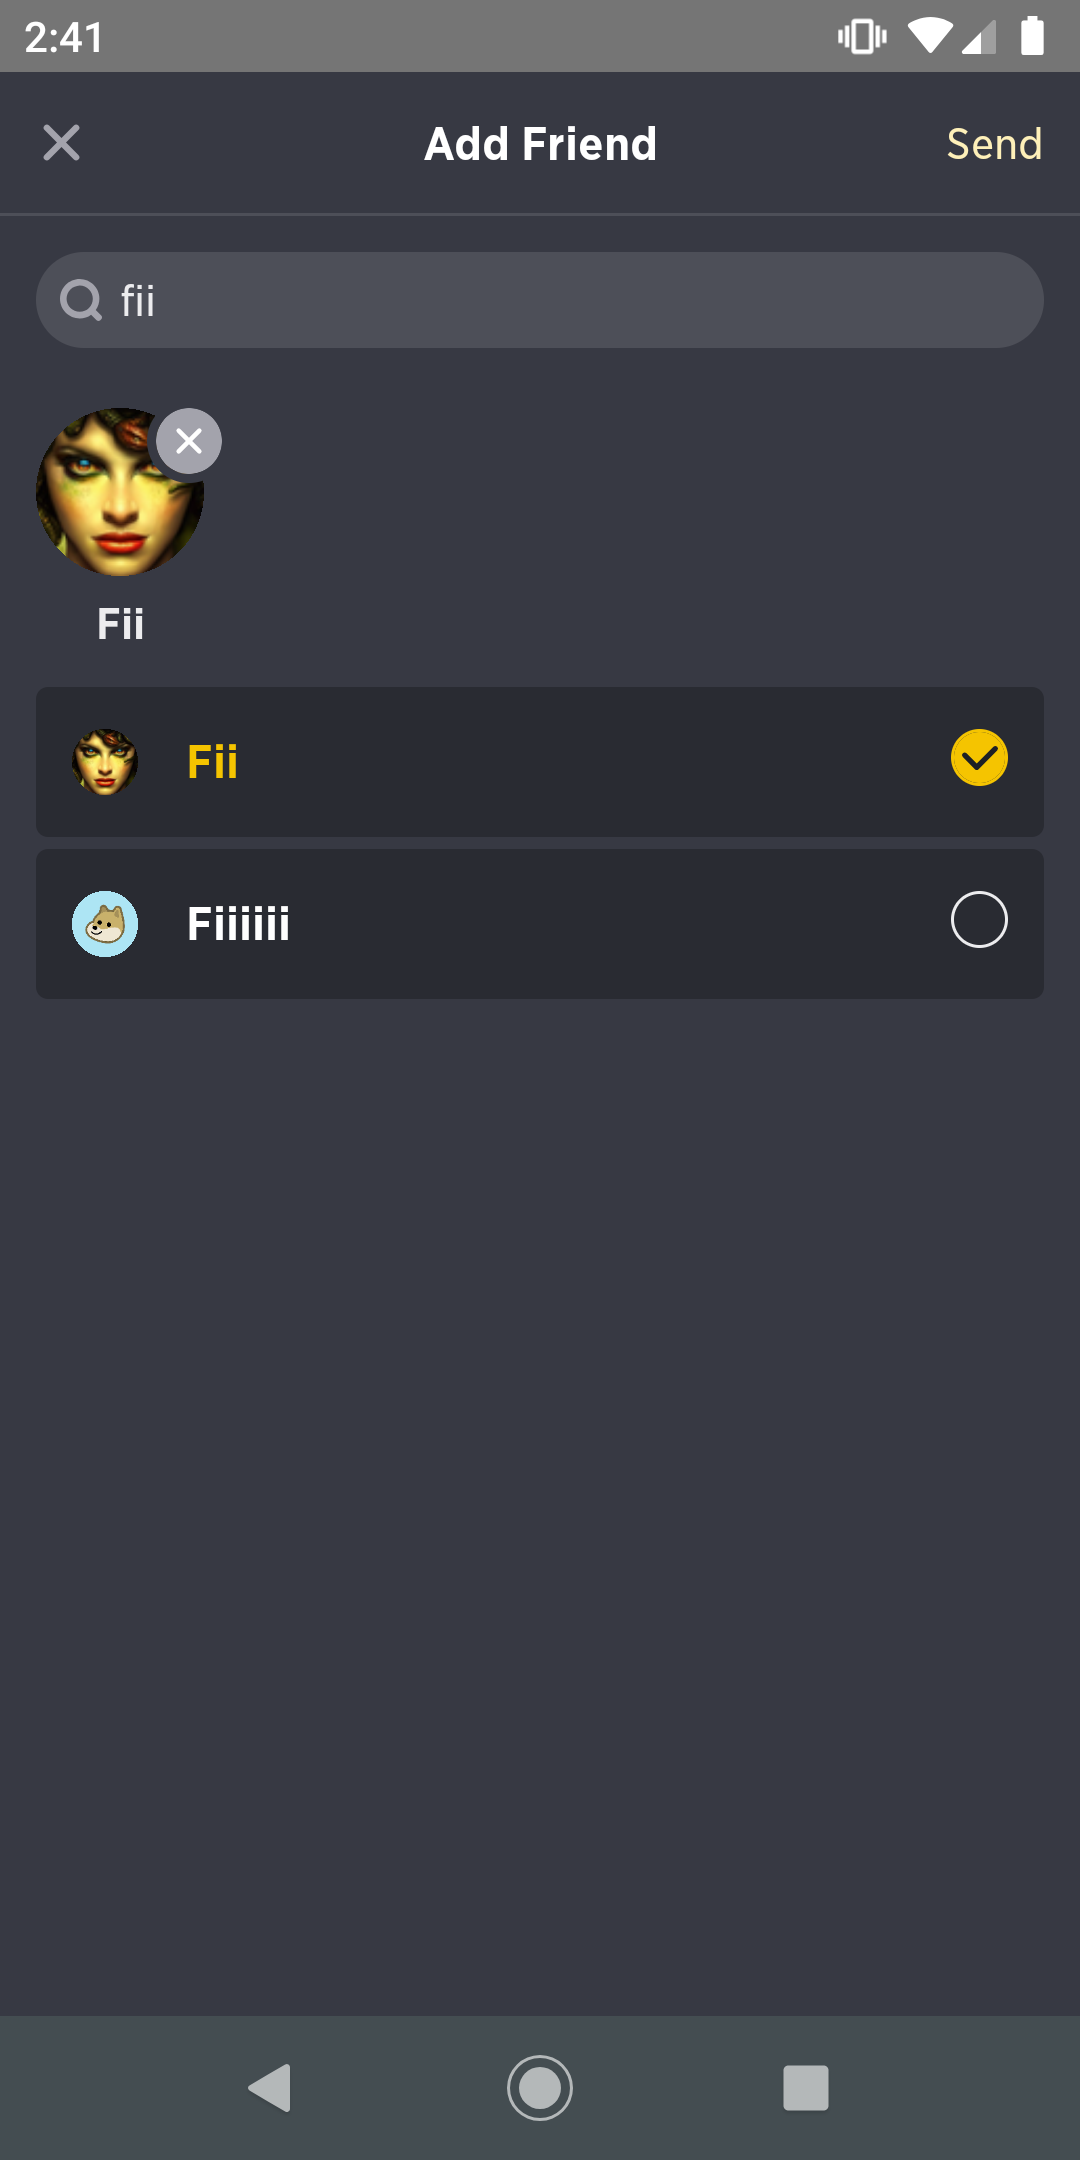 Adding_Fii_on_mobile.png